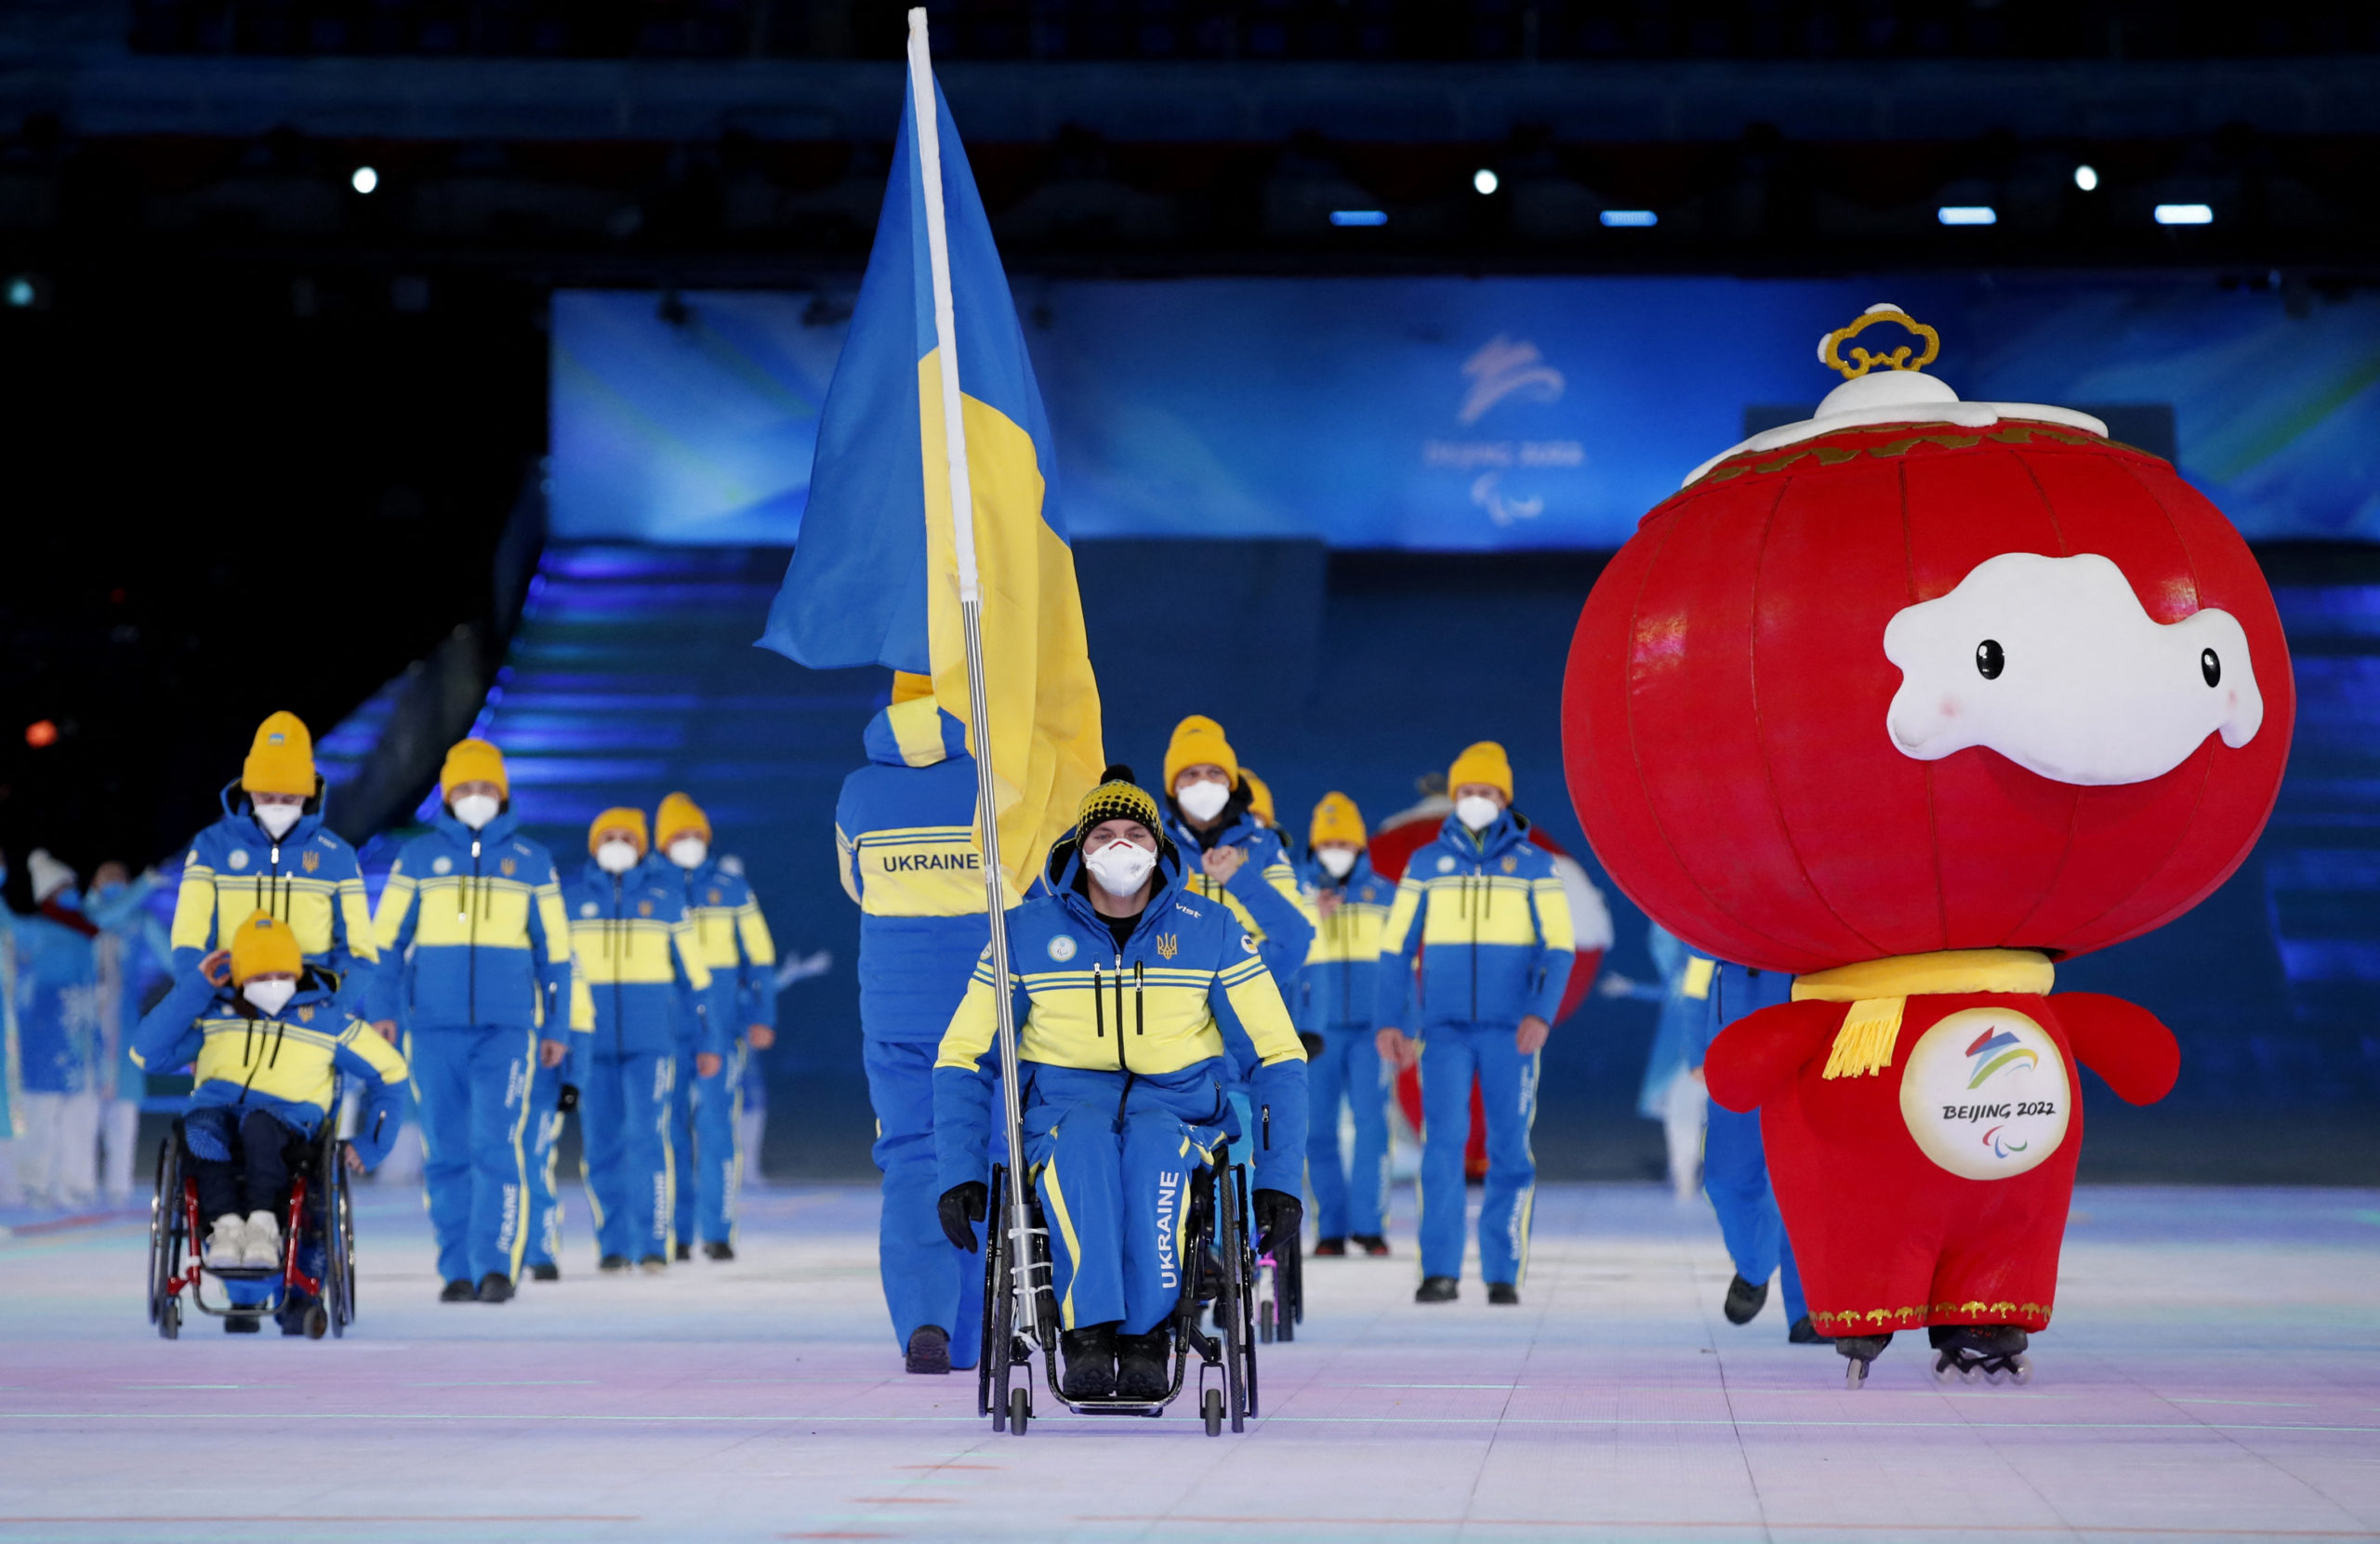 Beijing 2022 Winter Paralympic Games - Opening Ceremony - National Stadium, Beijing, China - March 4, 2022. Flagbearer Maksym Yarovyi of Ukraine leads his contingent during the athletes parade at the opening ceremony. 